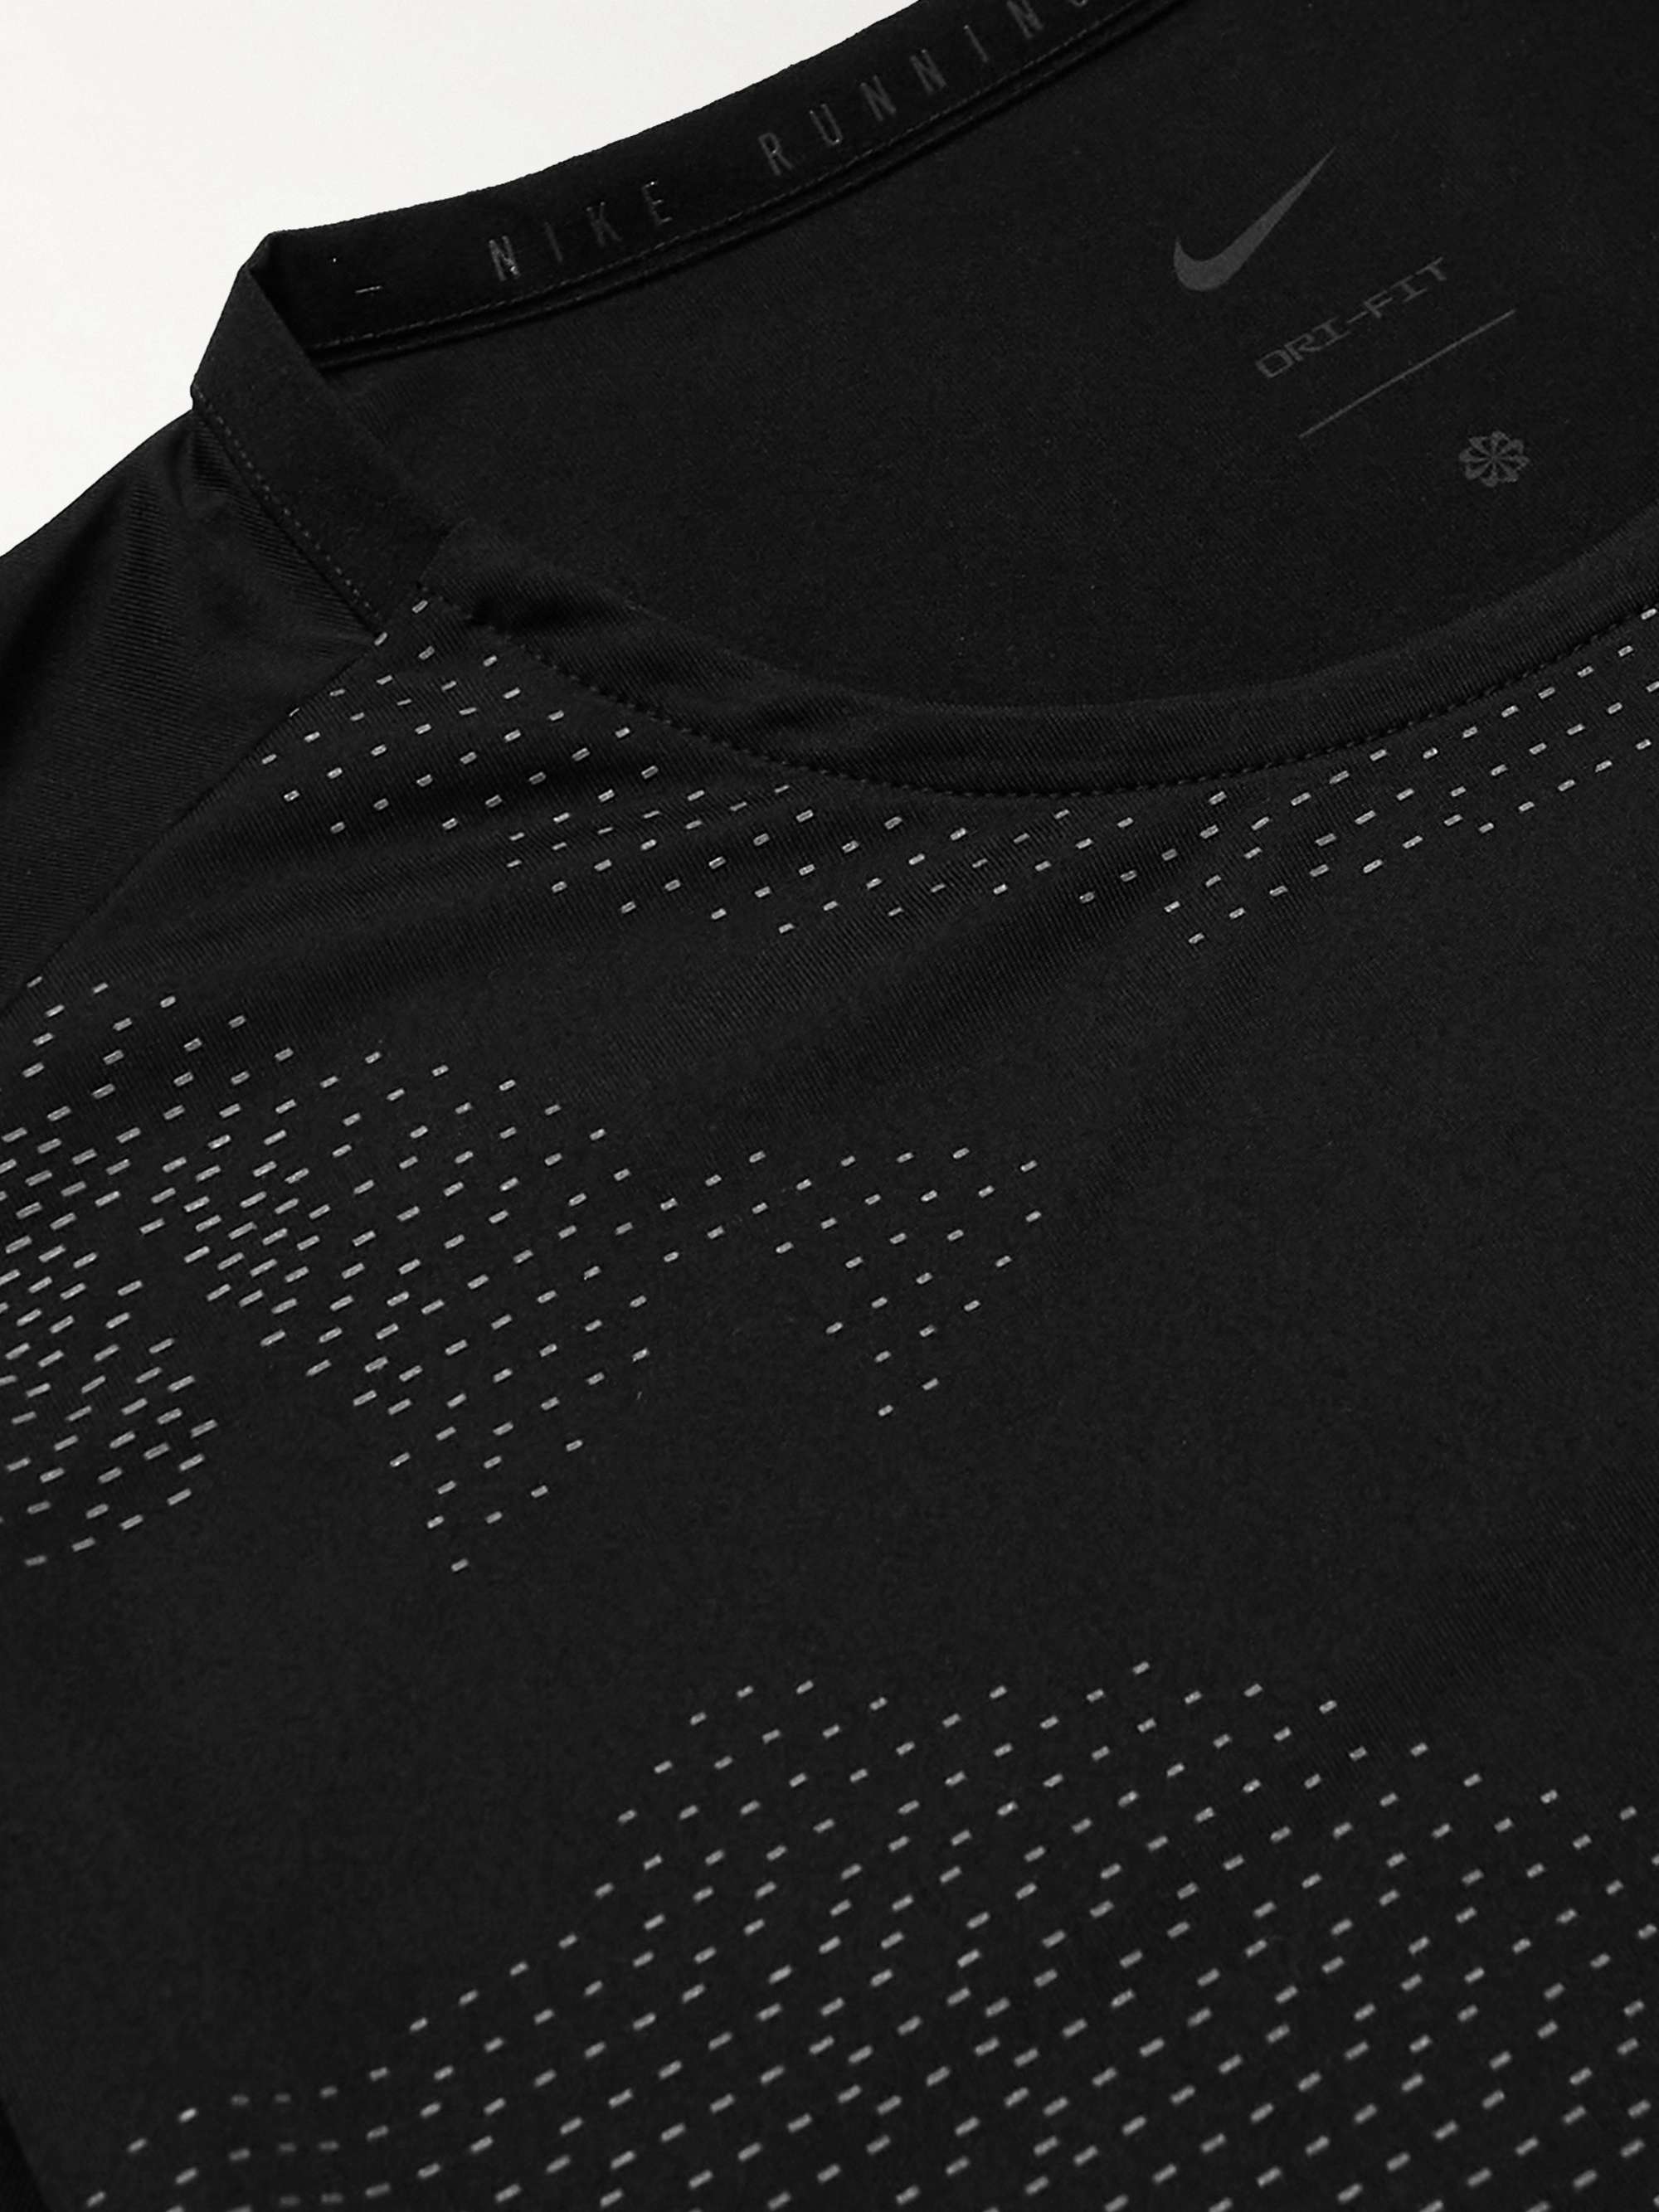 NIKE RUNNING Reflective-Trimmed Dri-FIT Jersey Top